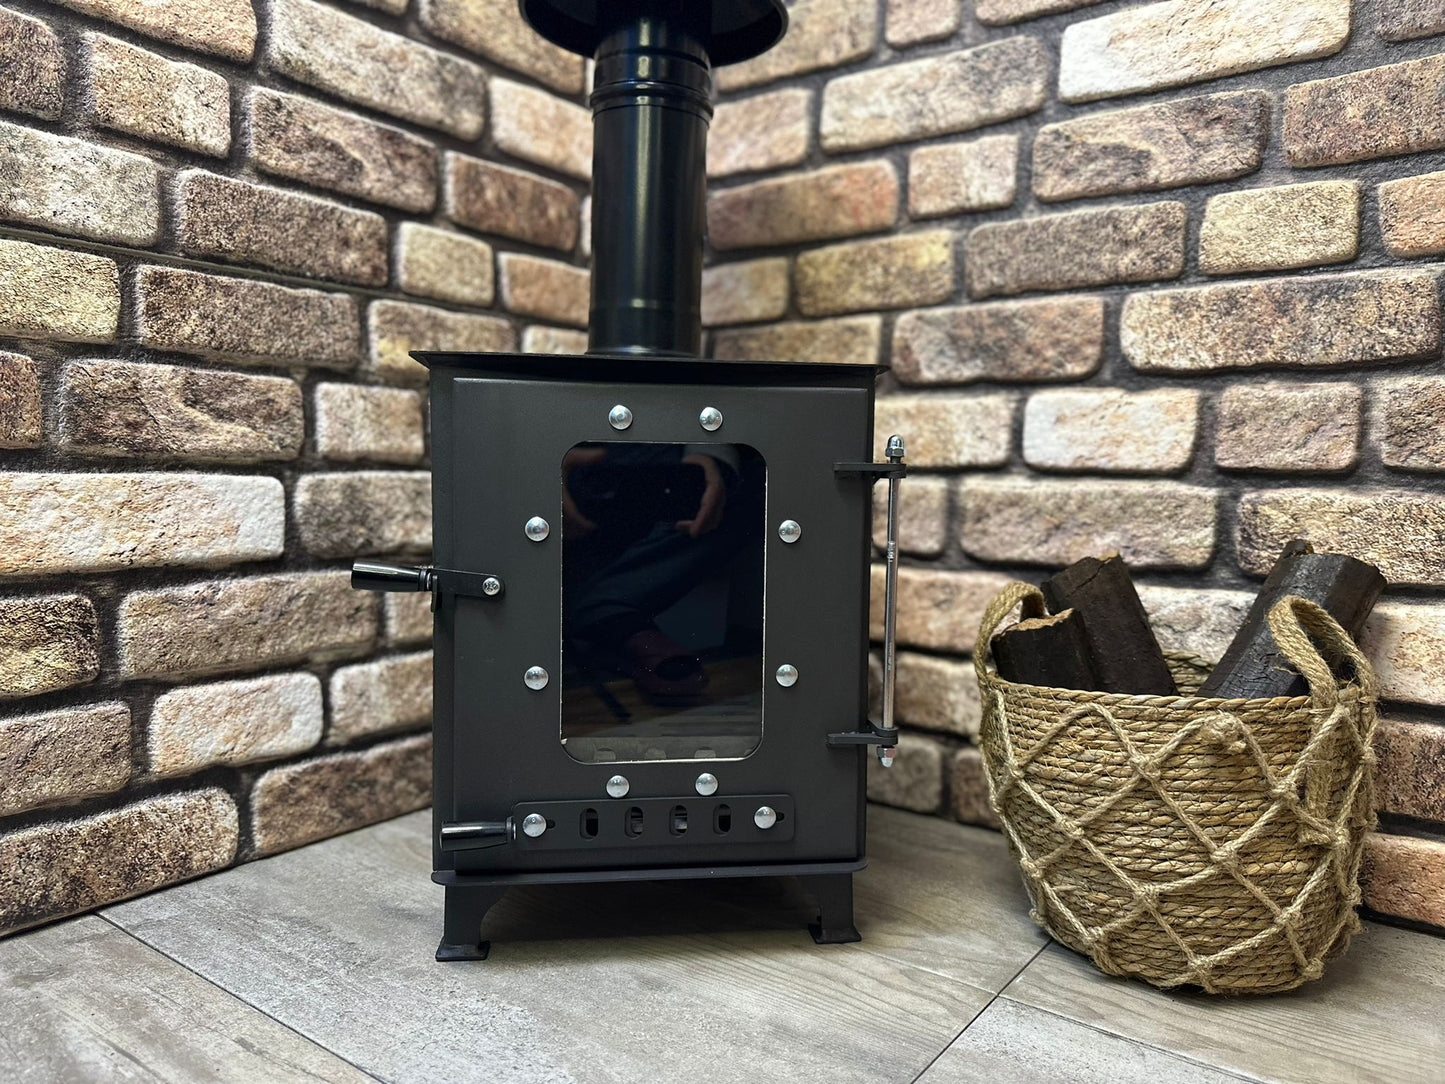 Wide Size Wood Burning Stove, Campervan Stove, Camping Stove, Tent Stove, Camping Heating, School Bus Conversion Stove, Tiny Home Stove